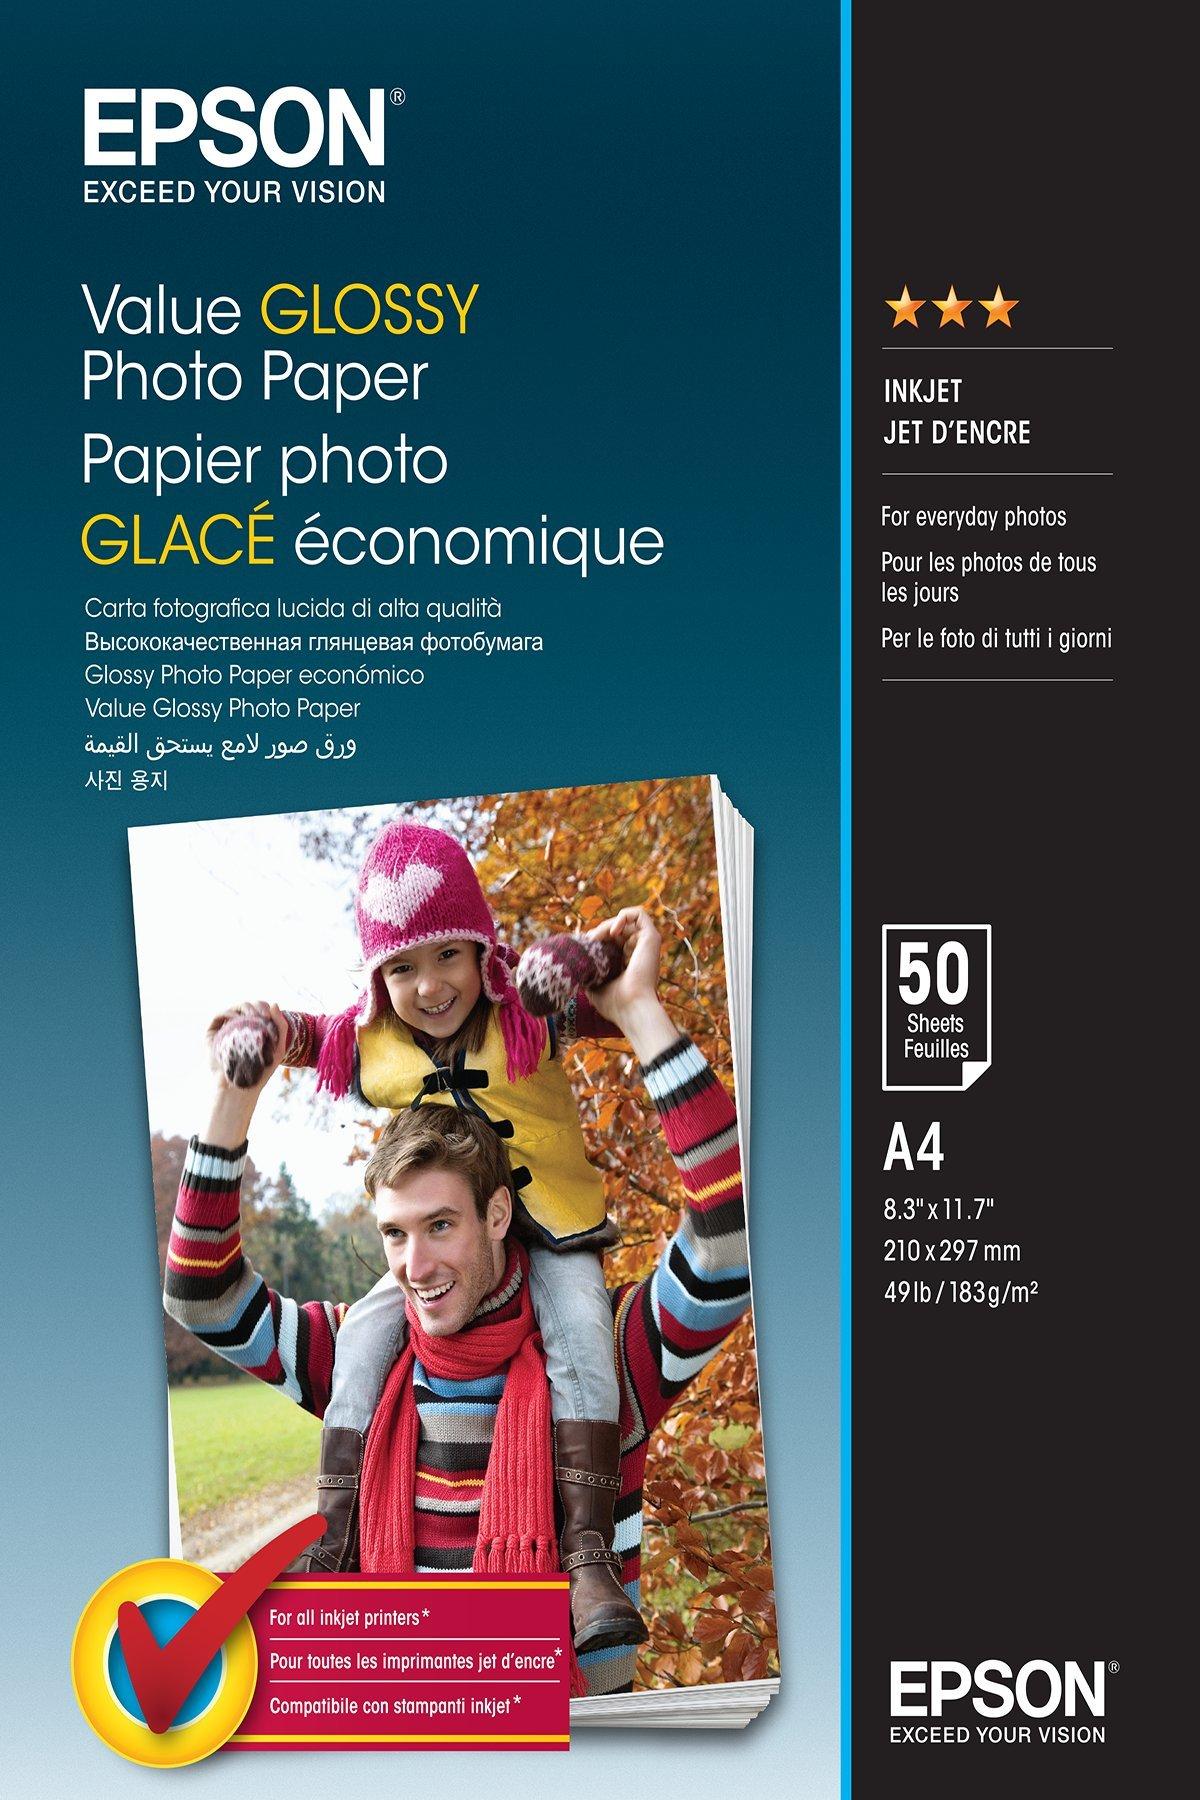 Value Glossy Photo Paper - A4 - 50 sheets, Paper and Media